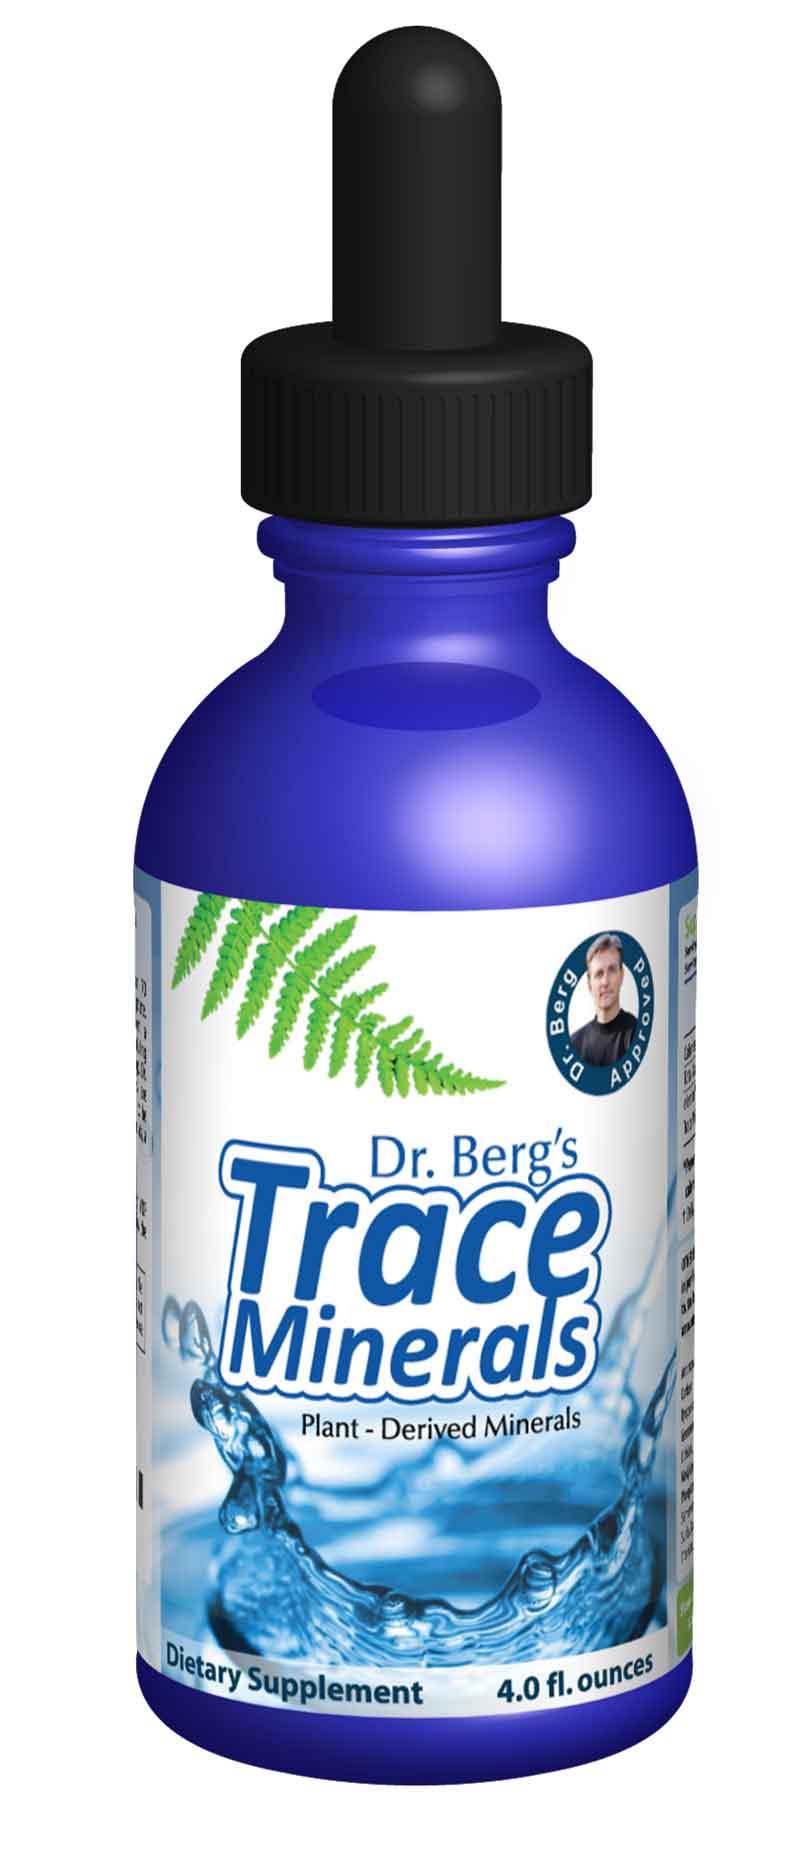 Dr. Berg Reviews for sale
